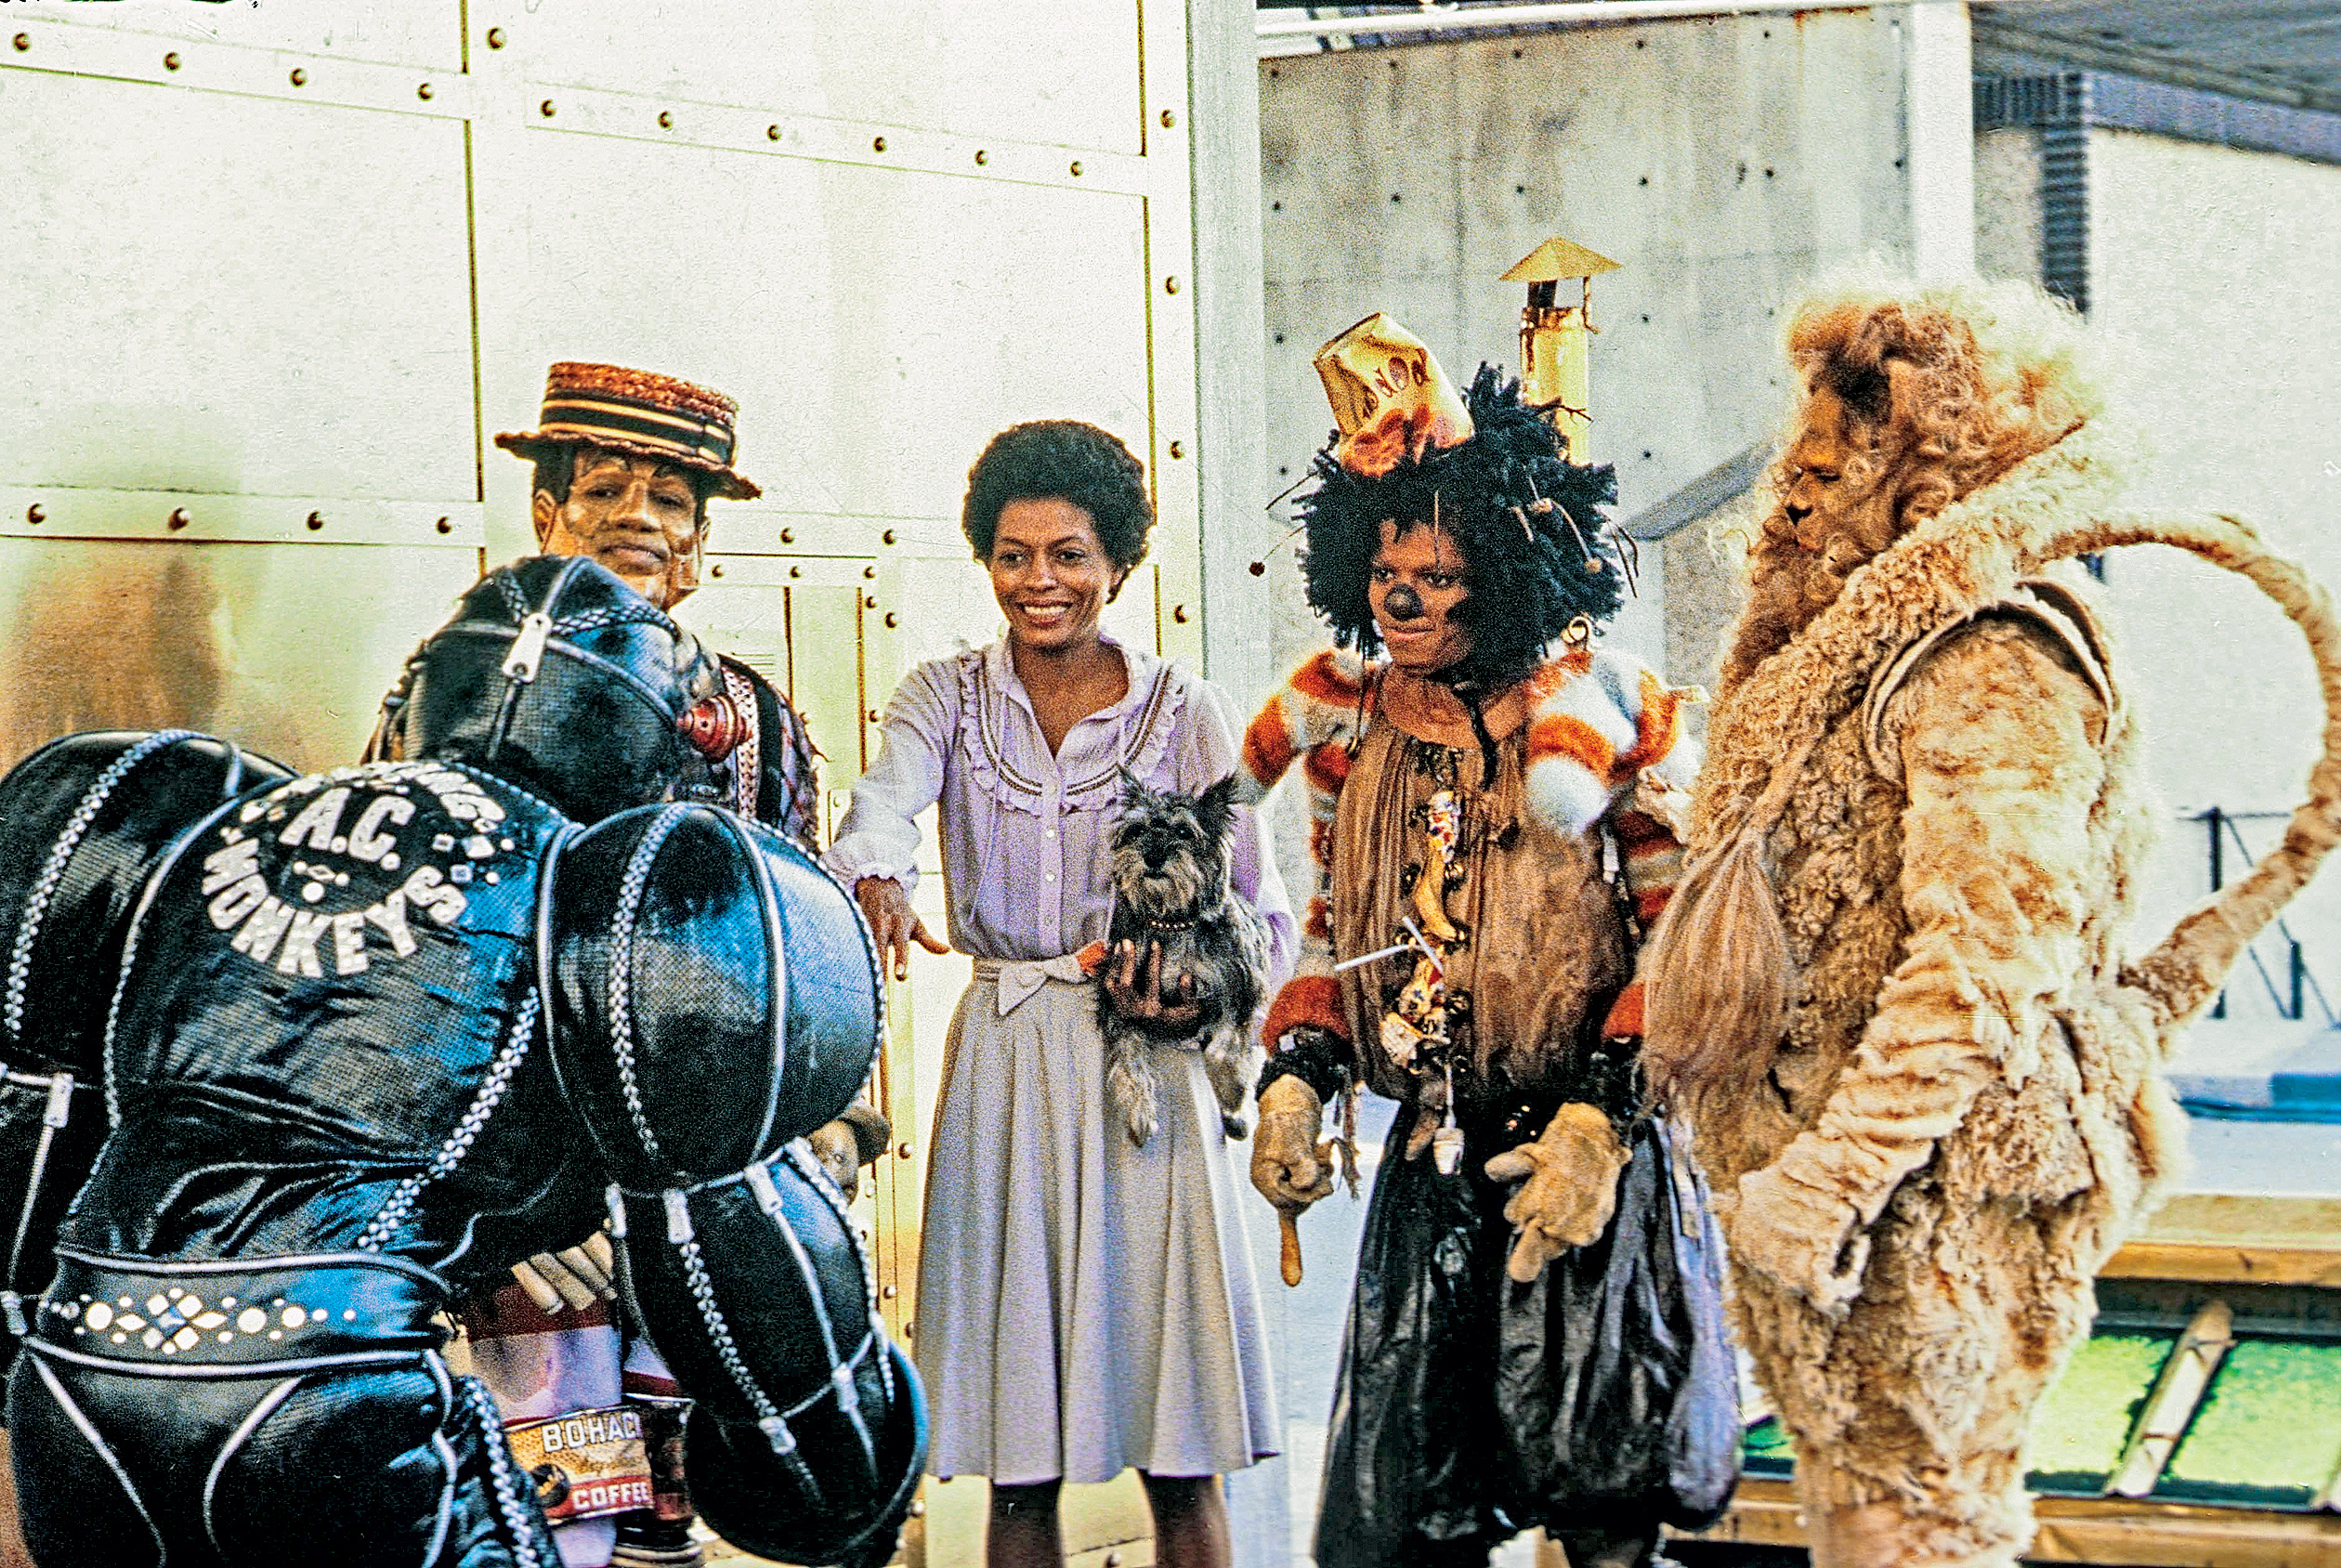 The Wiz, Ease On Down The Road, African American Theater, Black Theater, African American Entertainment, Black Entertainment, Porgy and Bess, KOLUMN Magazine, KOLUMN, Willoughby Avenue